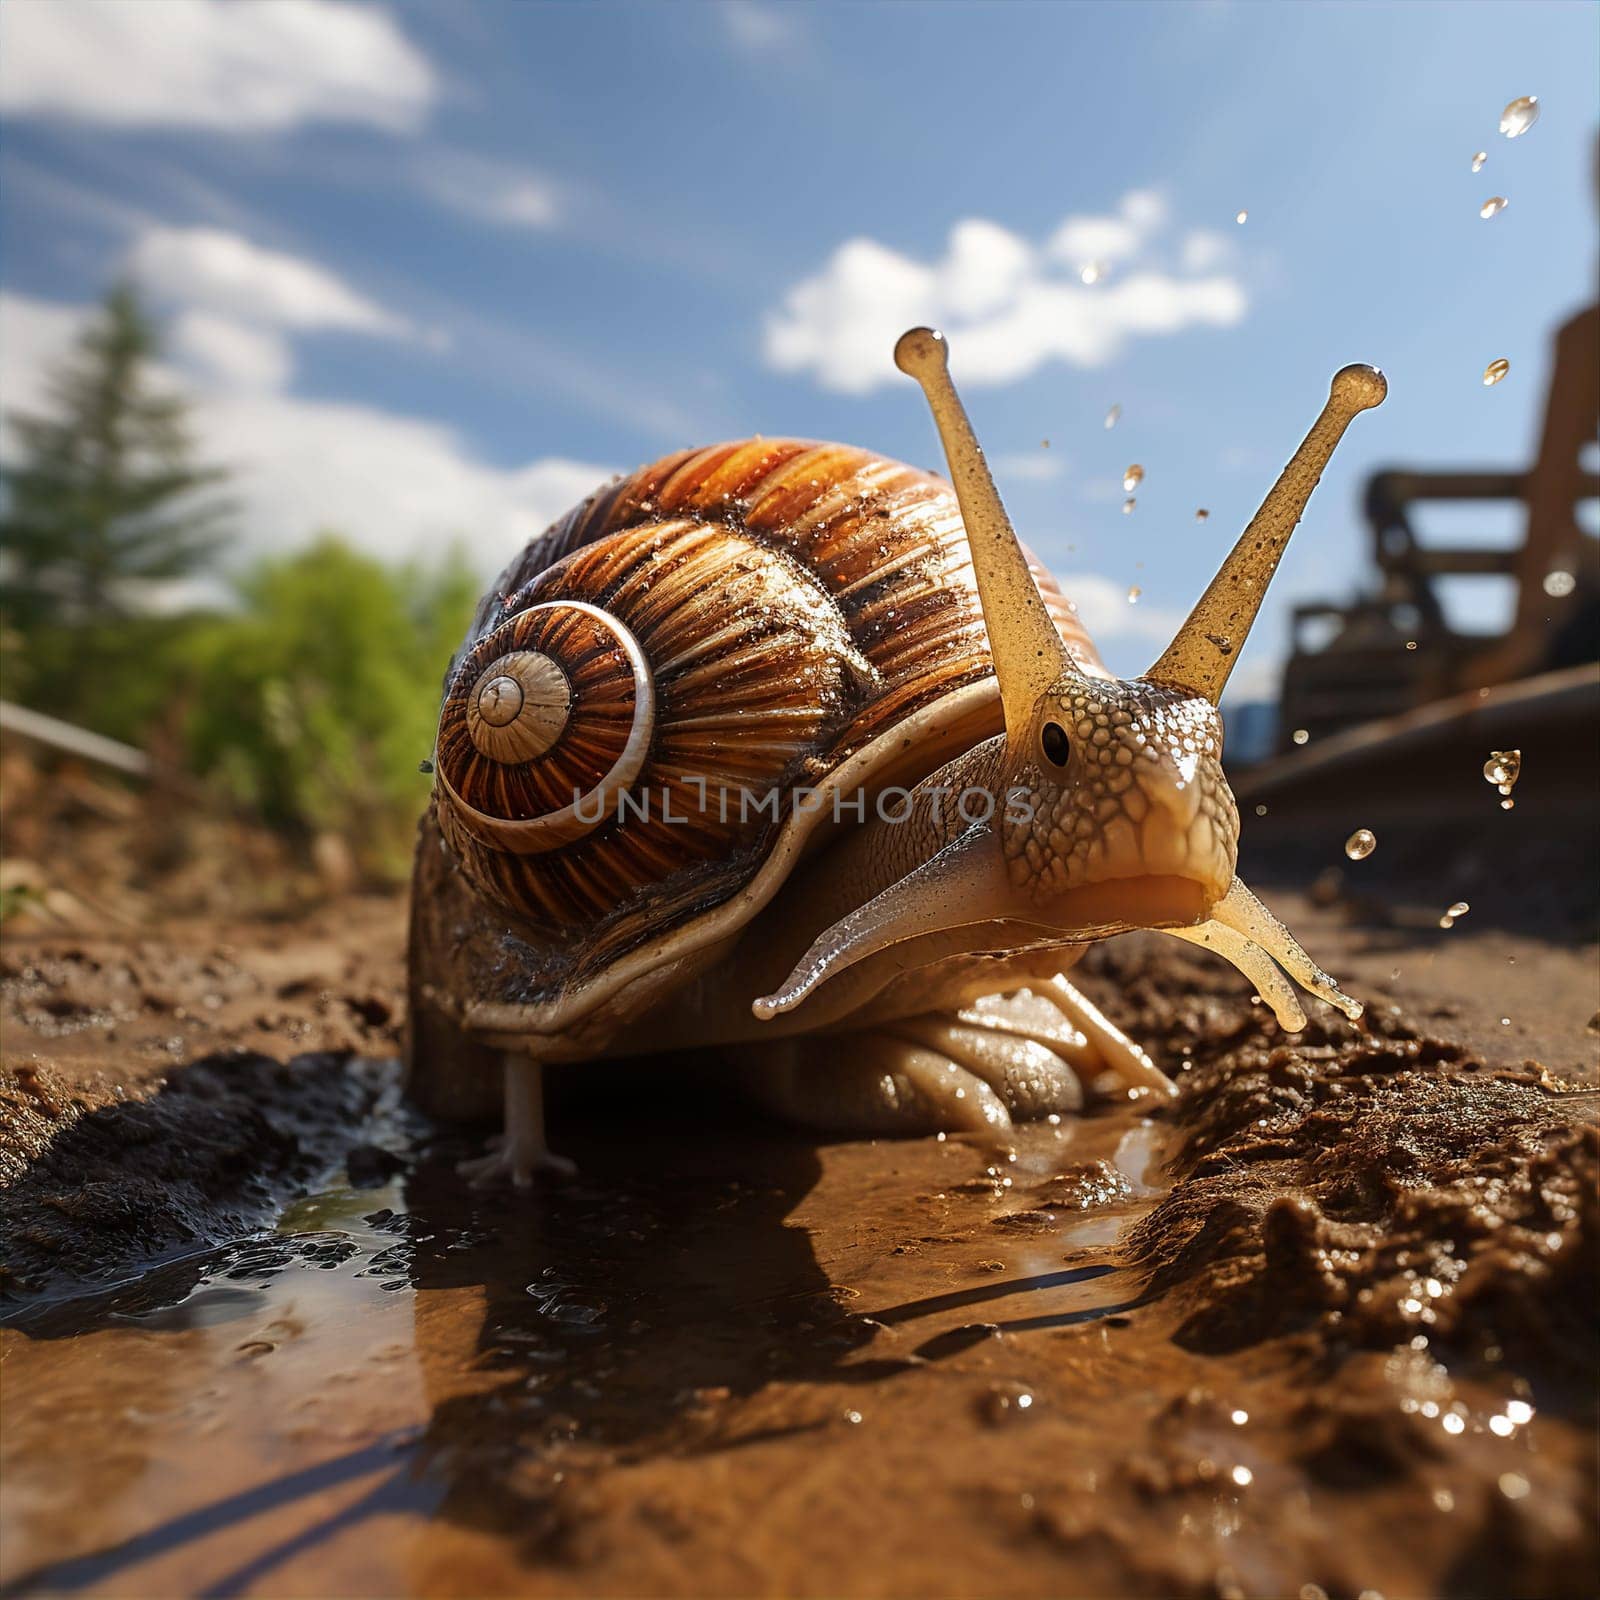 Mutant snail in shape of train with many horns slowly crawling in dirt by kuprevich